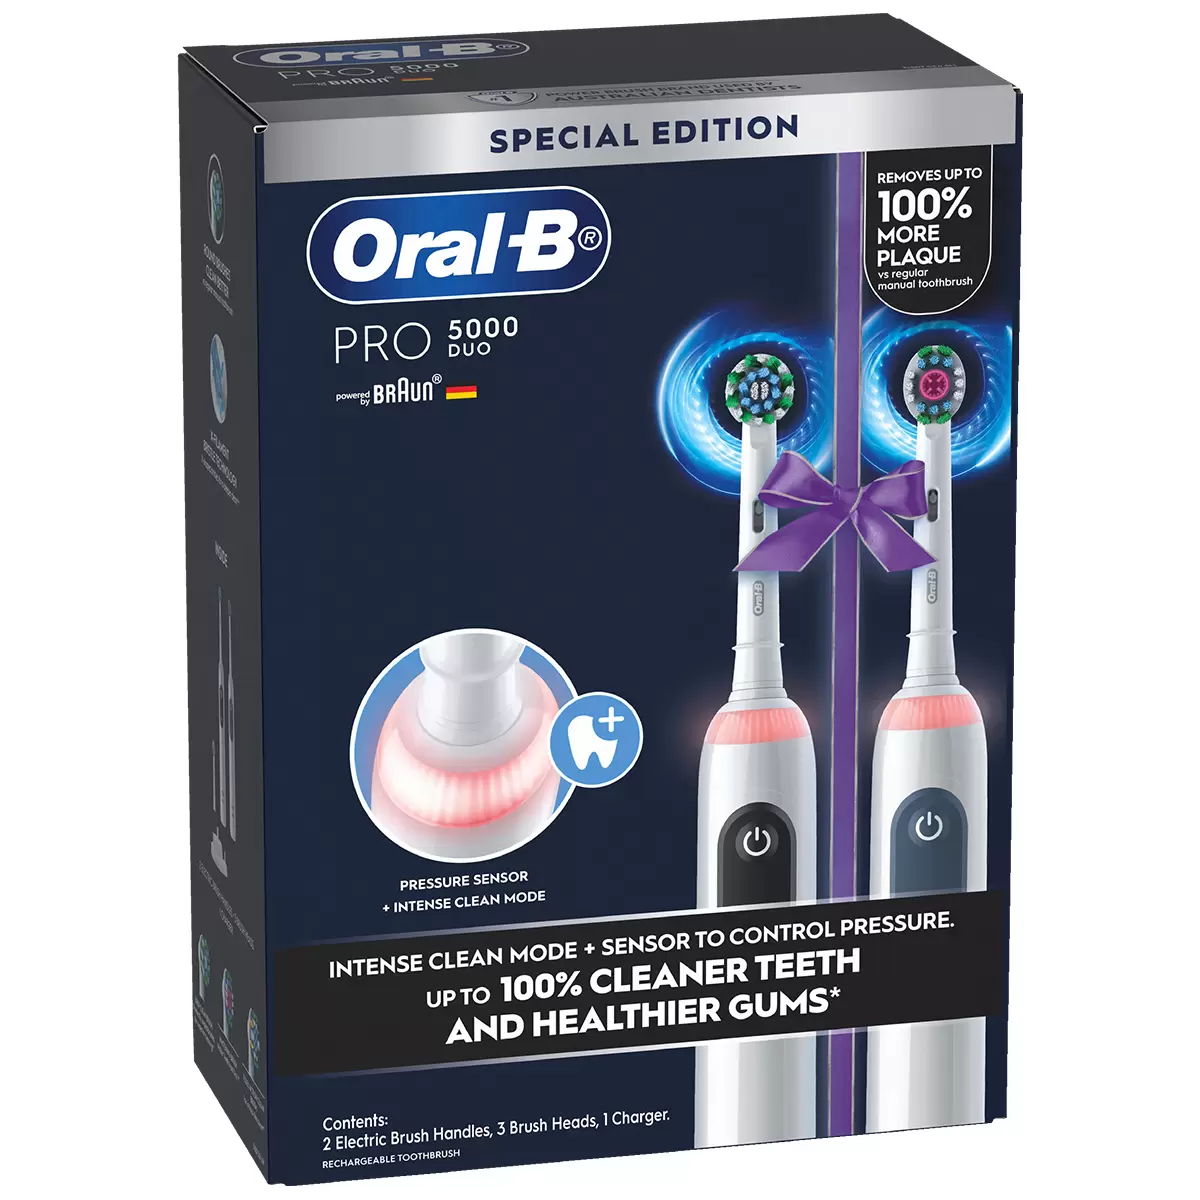 Oral-B PRO 5000 Electric Toothbrush Duo Pack